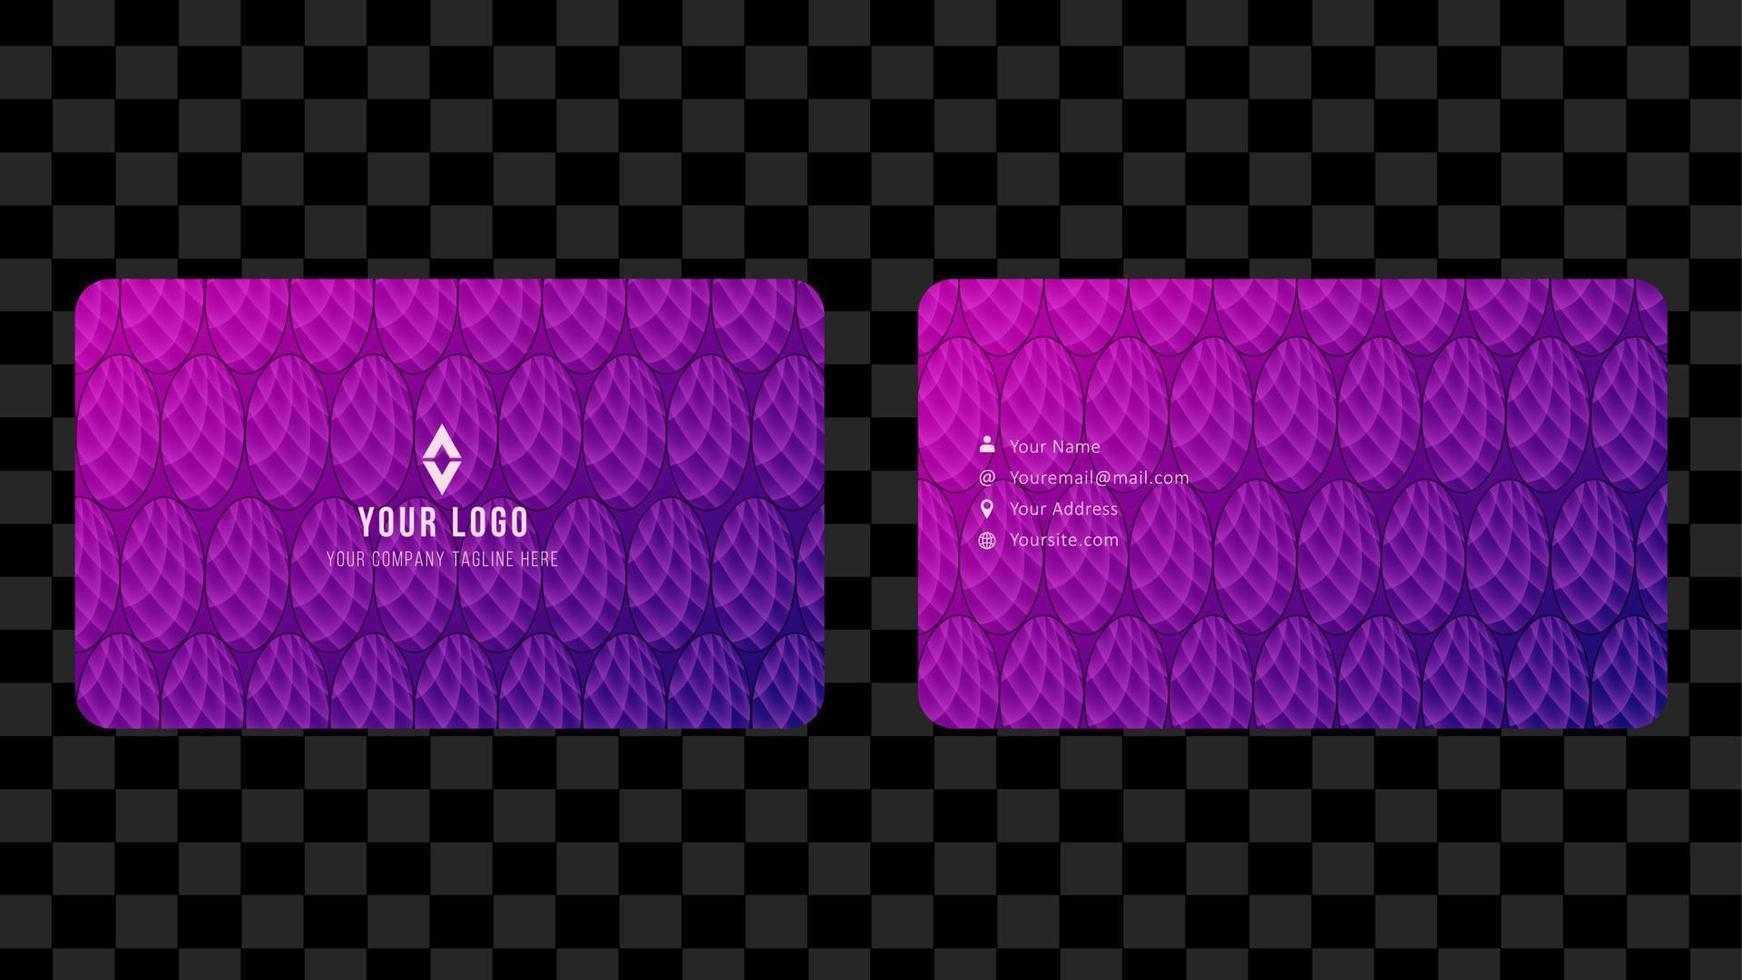 Creative business card template design, Contact card for company, Two sided with fluid gradient on purple background, Vector graphic illustration